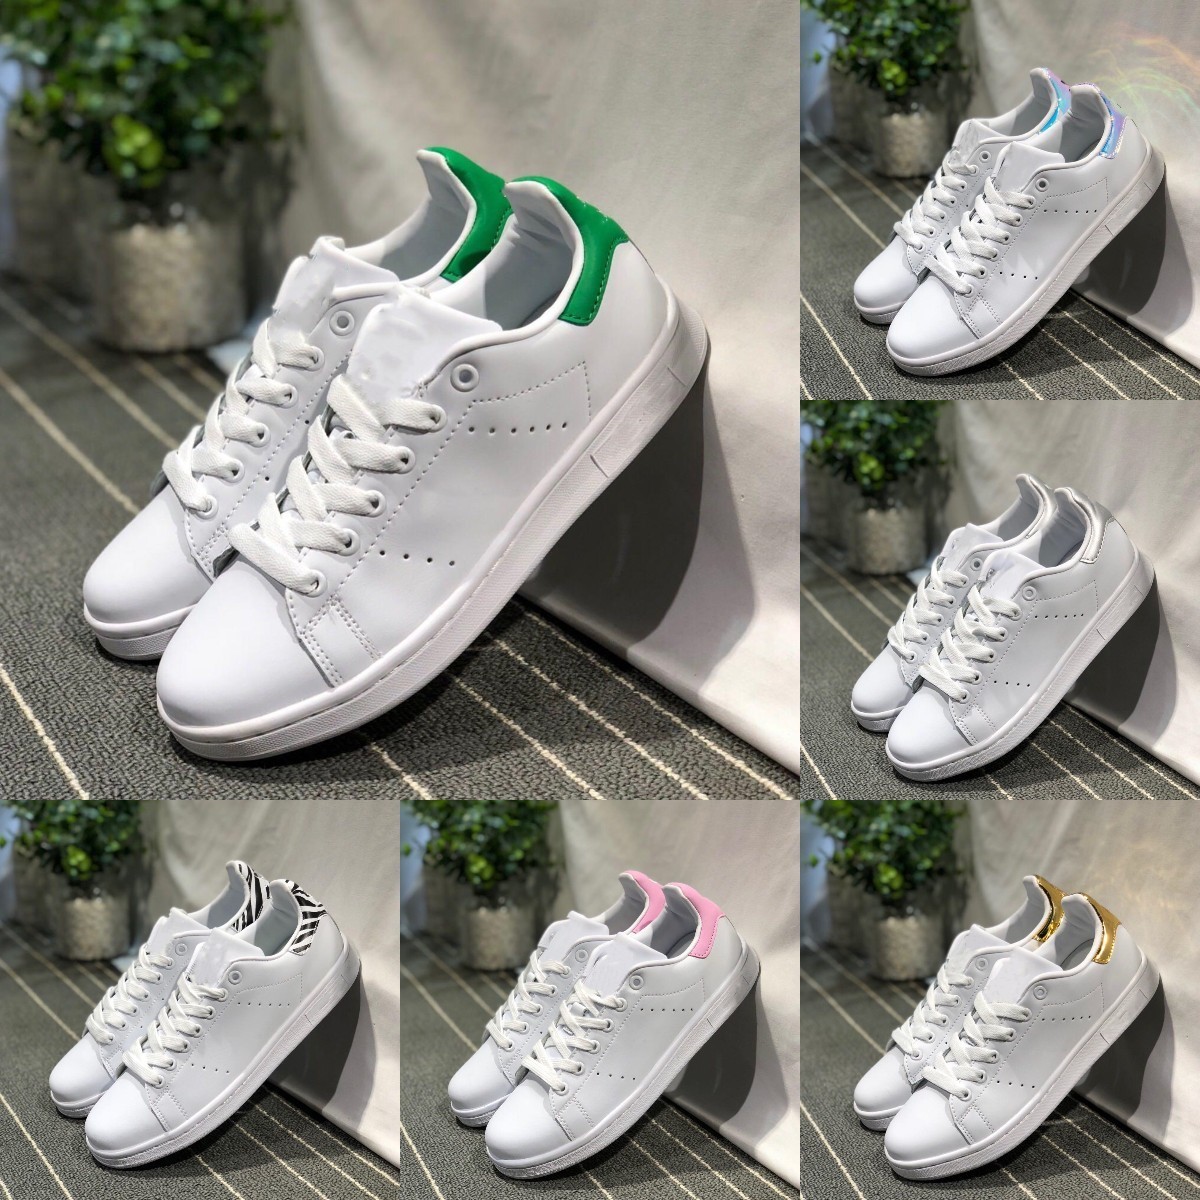 

2023 Mens Womens Free Superstar Casual Shoes Discount Designer White Black Pink Blue Gold Superstars 80s Pride Sneakers Super Star Women Men Sport Sneakers Y668, Please contact us